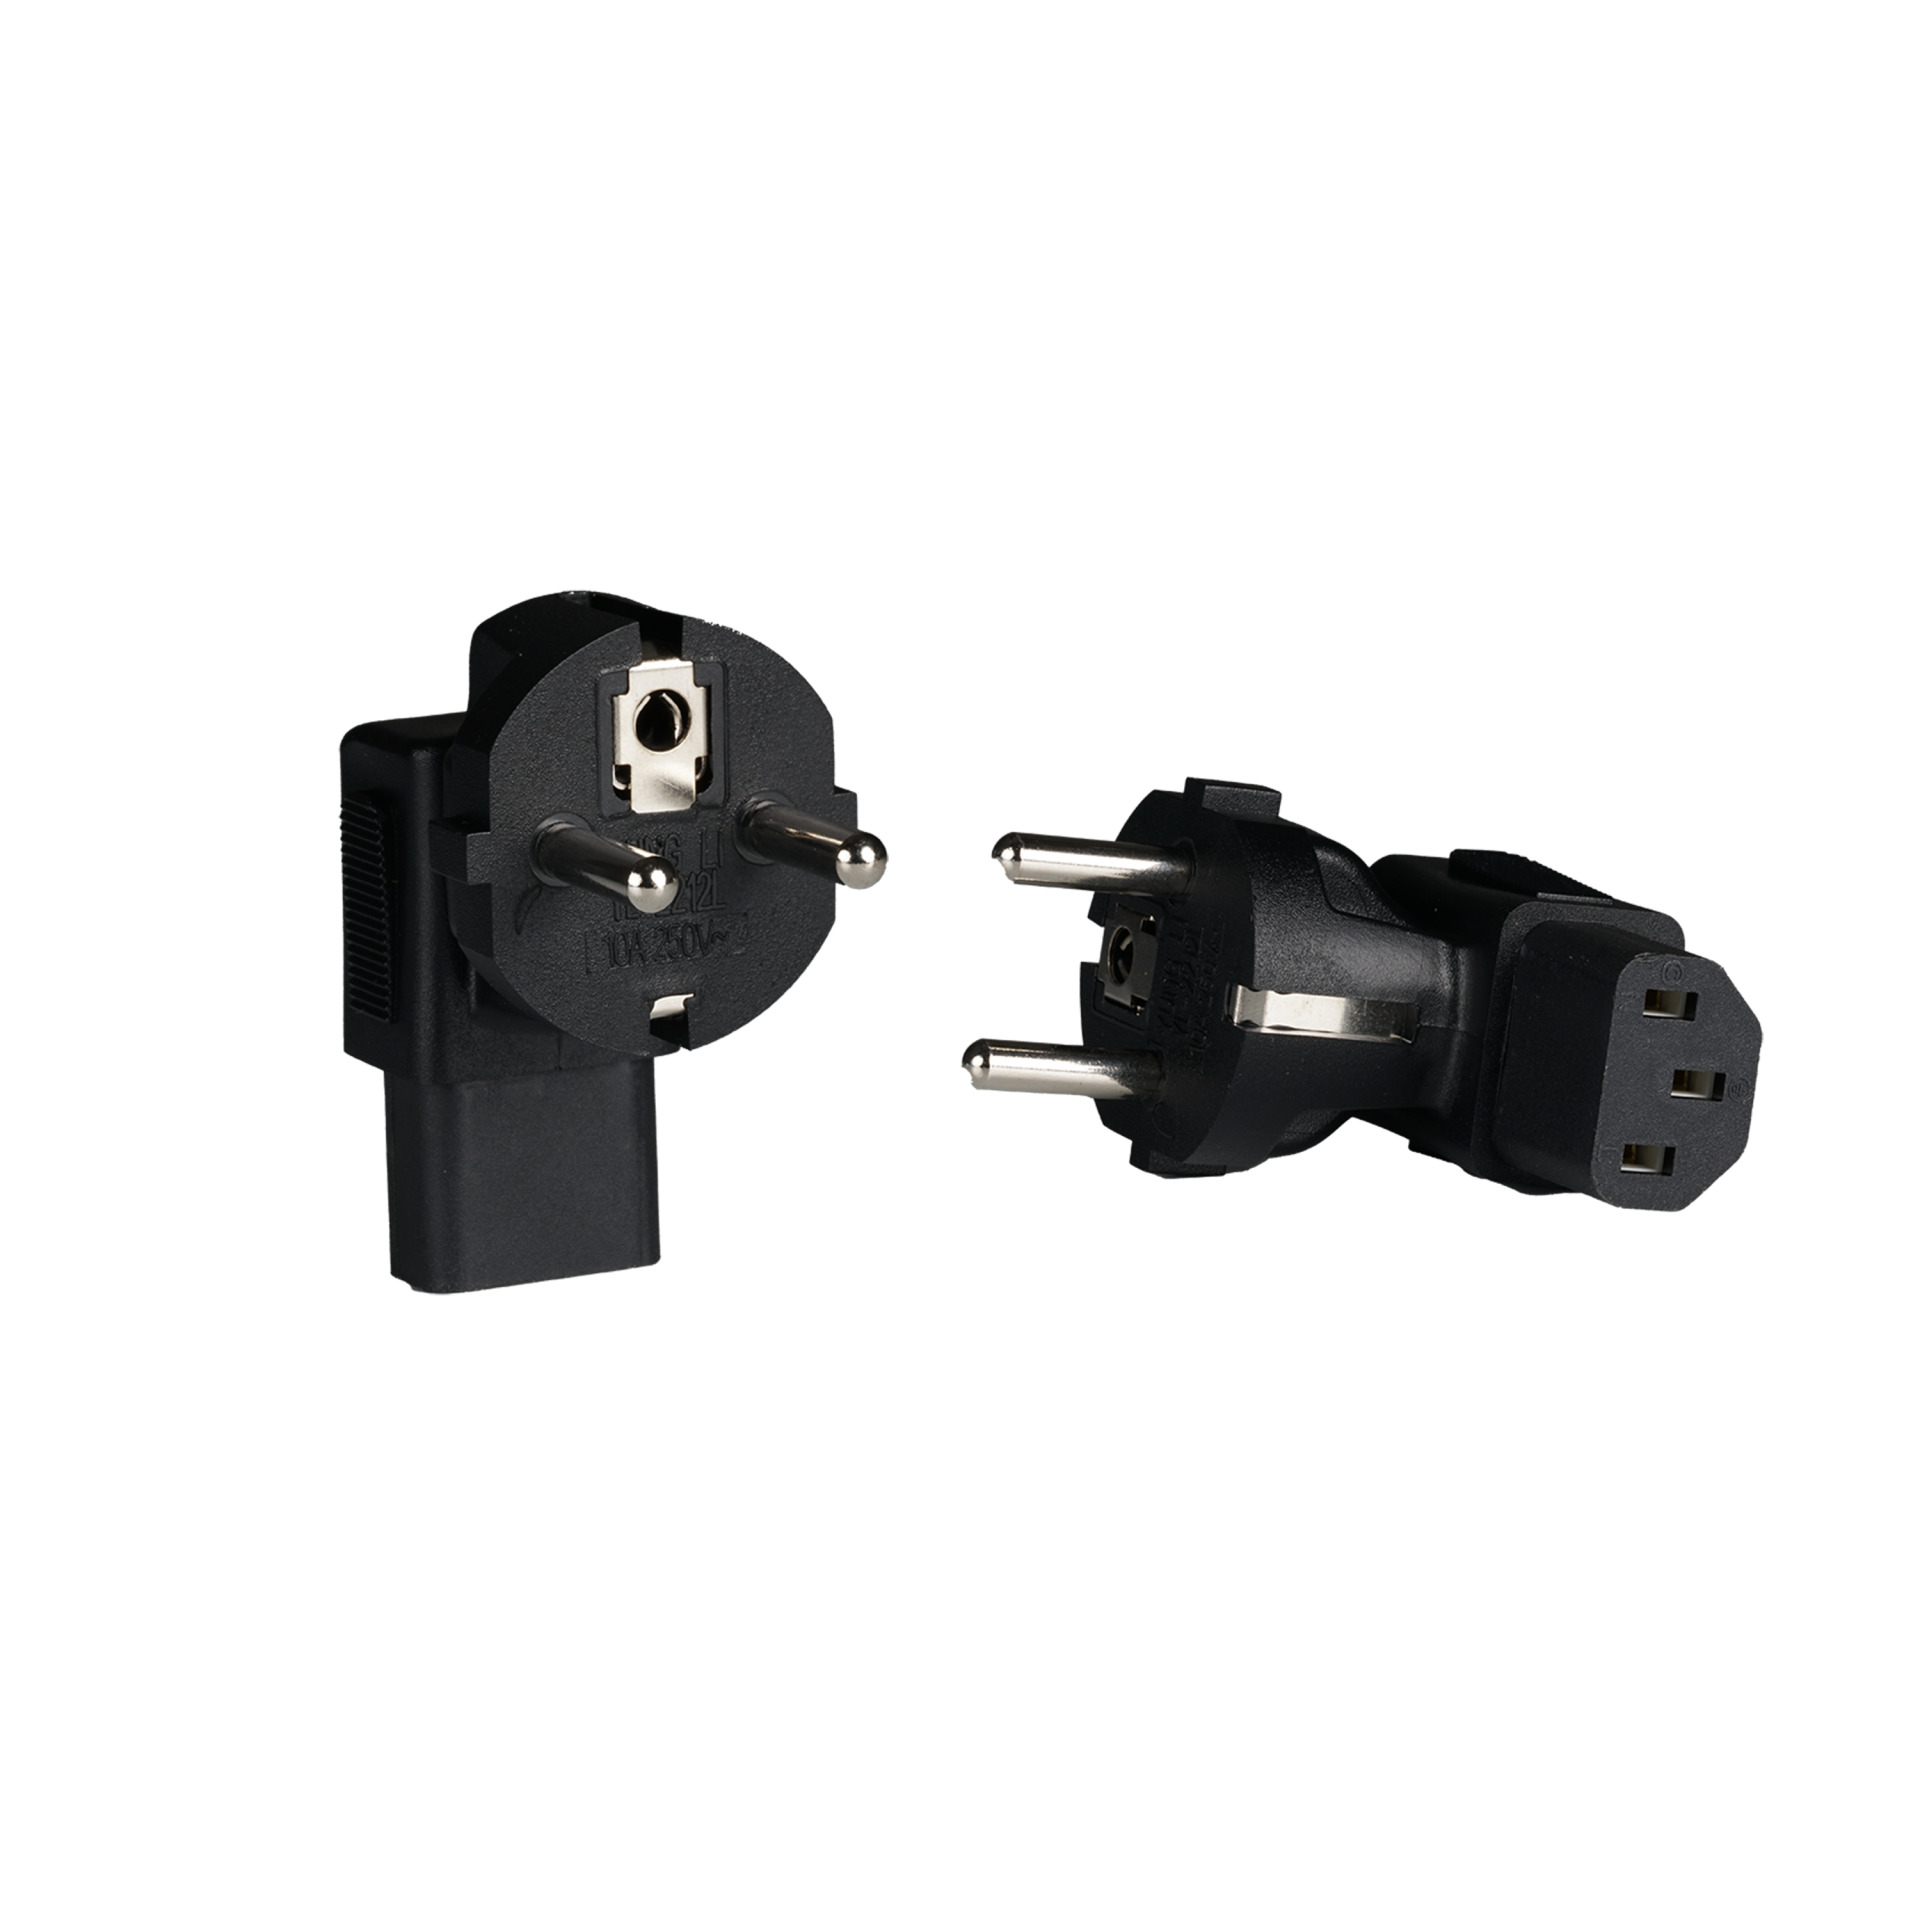 Mains adapter CEE7/7 to IEC C13 90°, earthing contact plug - IEC socket